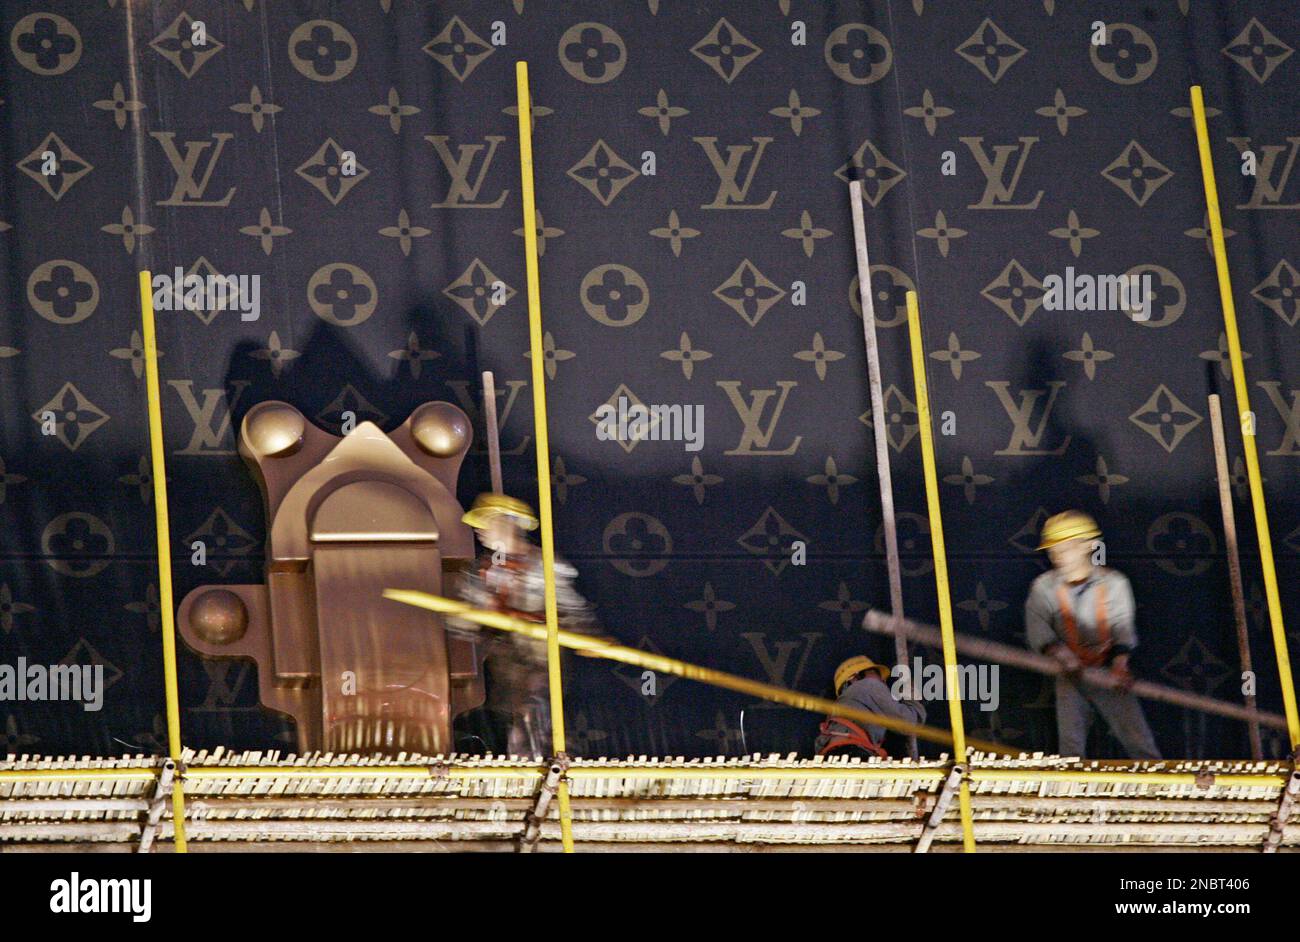 Workers dismantle a giant advertisement display modeling a Louis Vuitton  suitcase outside a Louis Vuitton branch on Thursday, May 19, 2011 in  Shanghai, China. Massive advertisements are being torn down because they